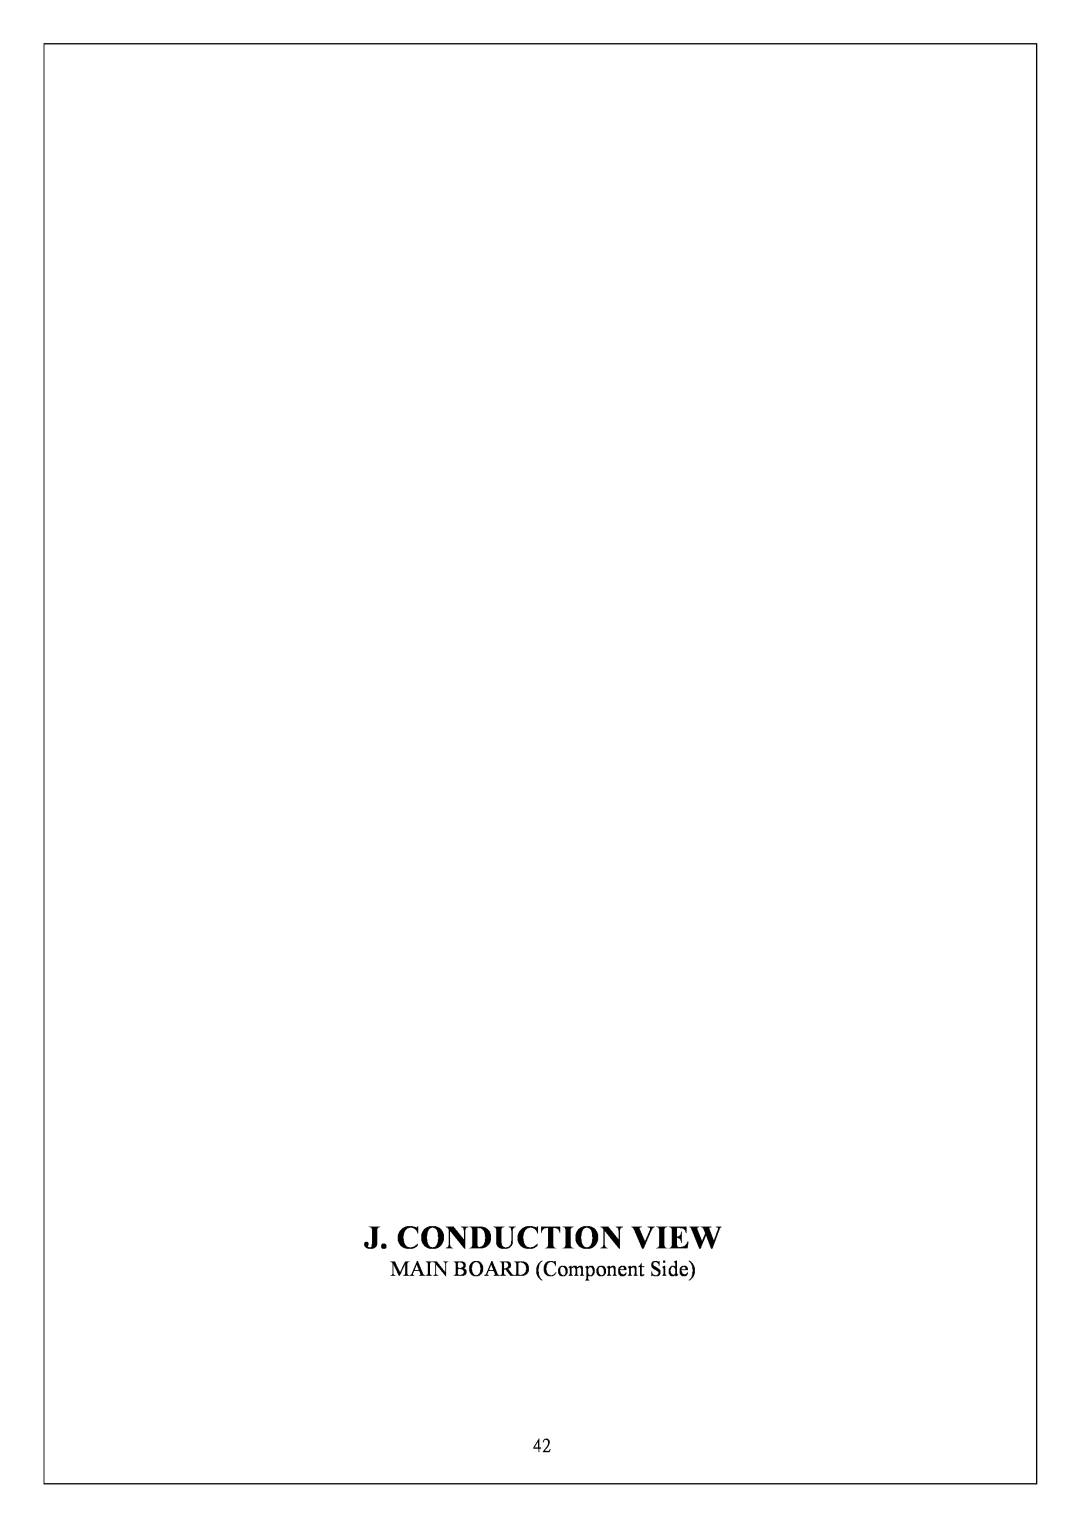 Proview P6NS Series service manual J. Conduction View, MAIN BOARD Component Side 